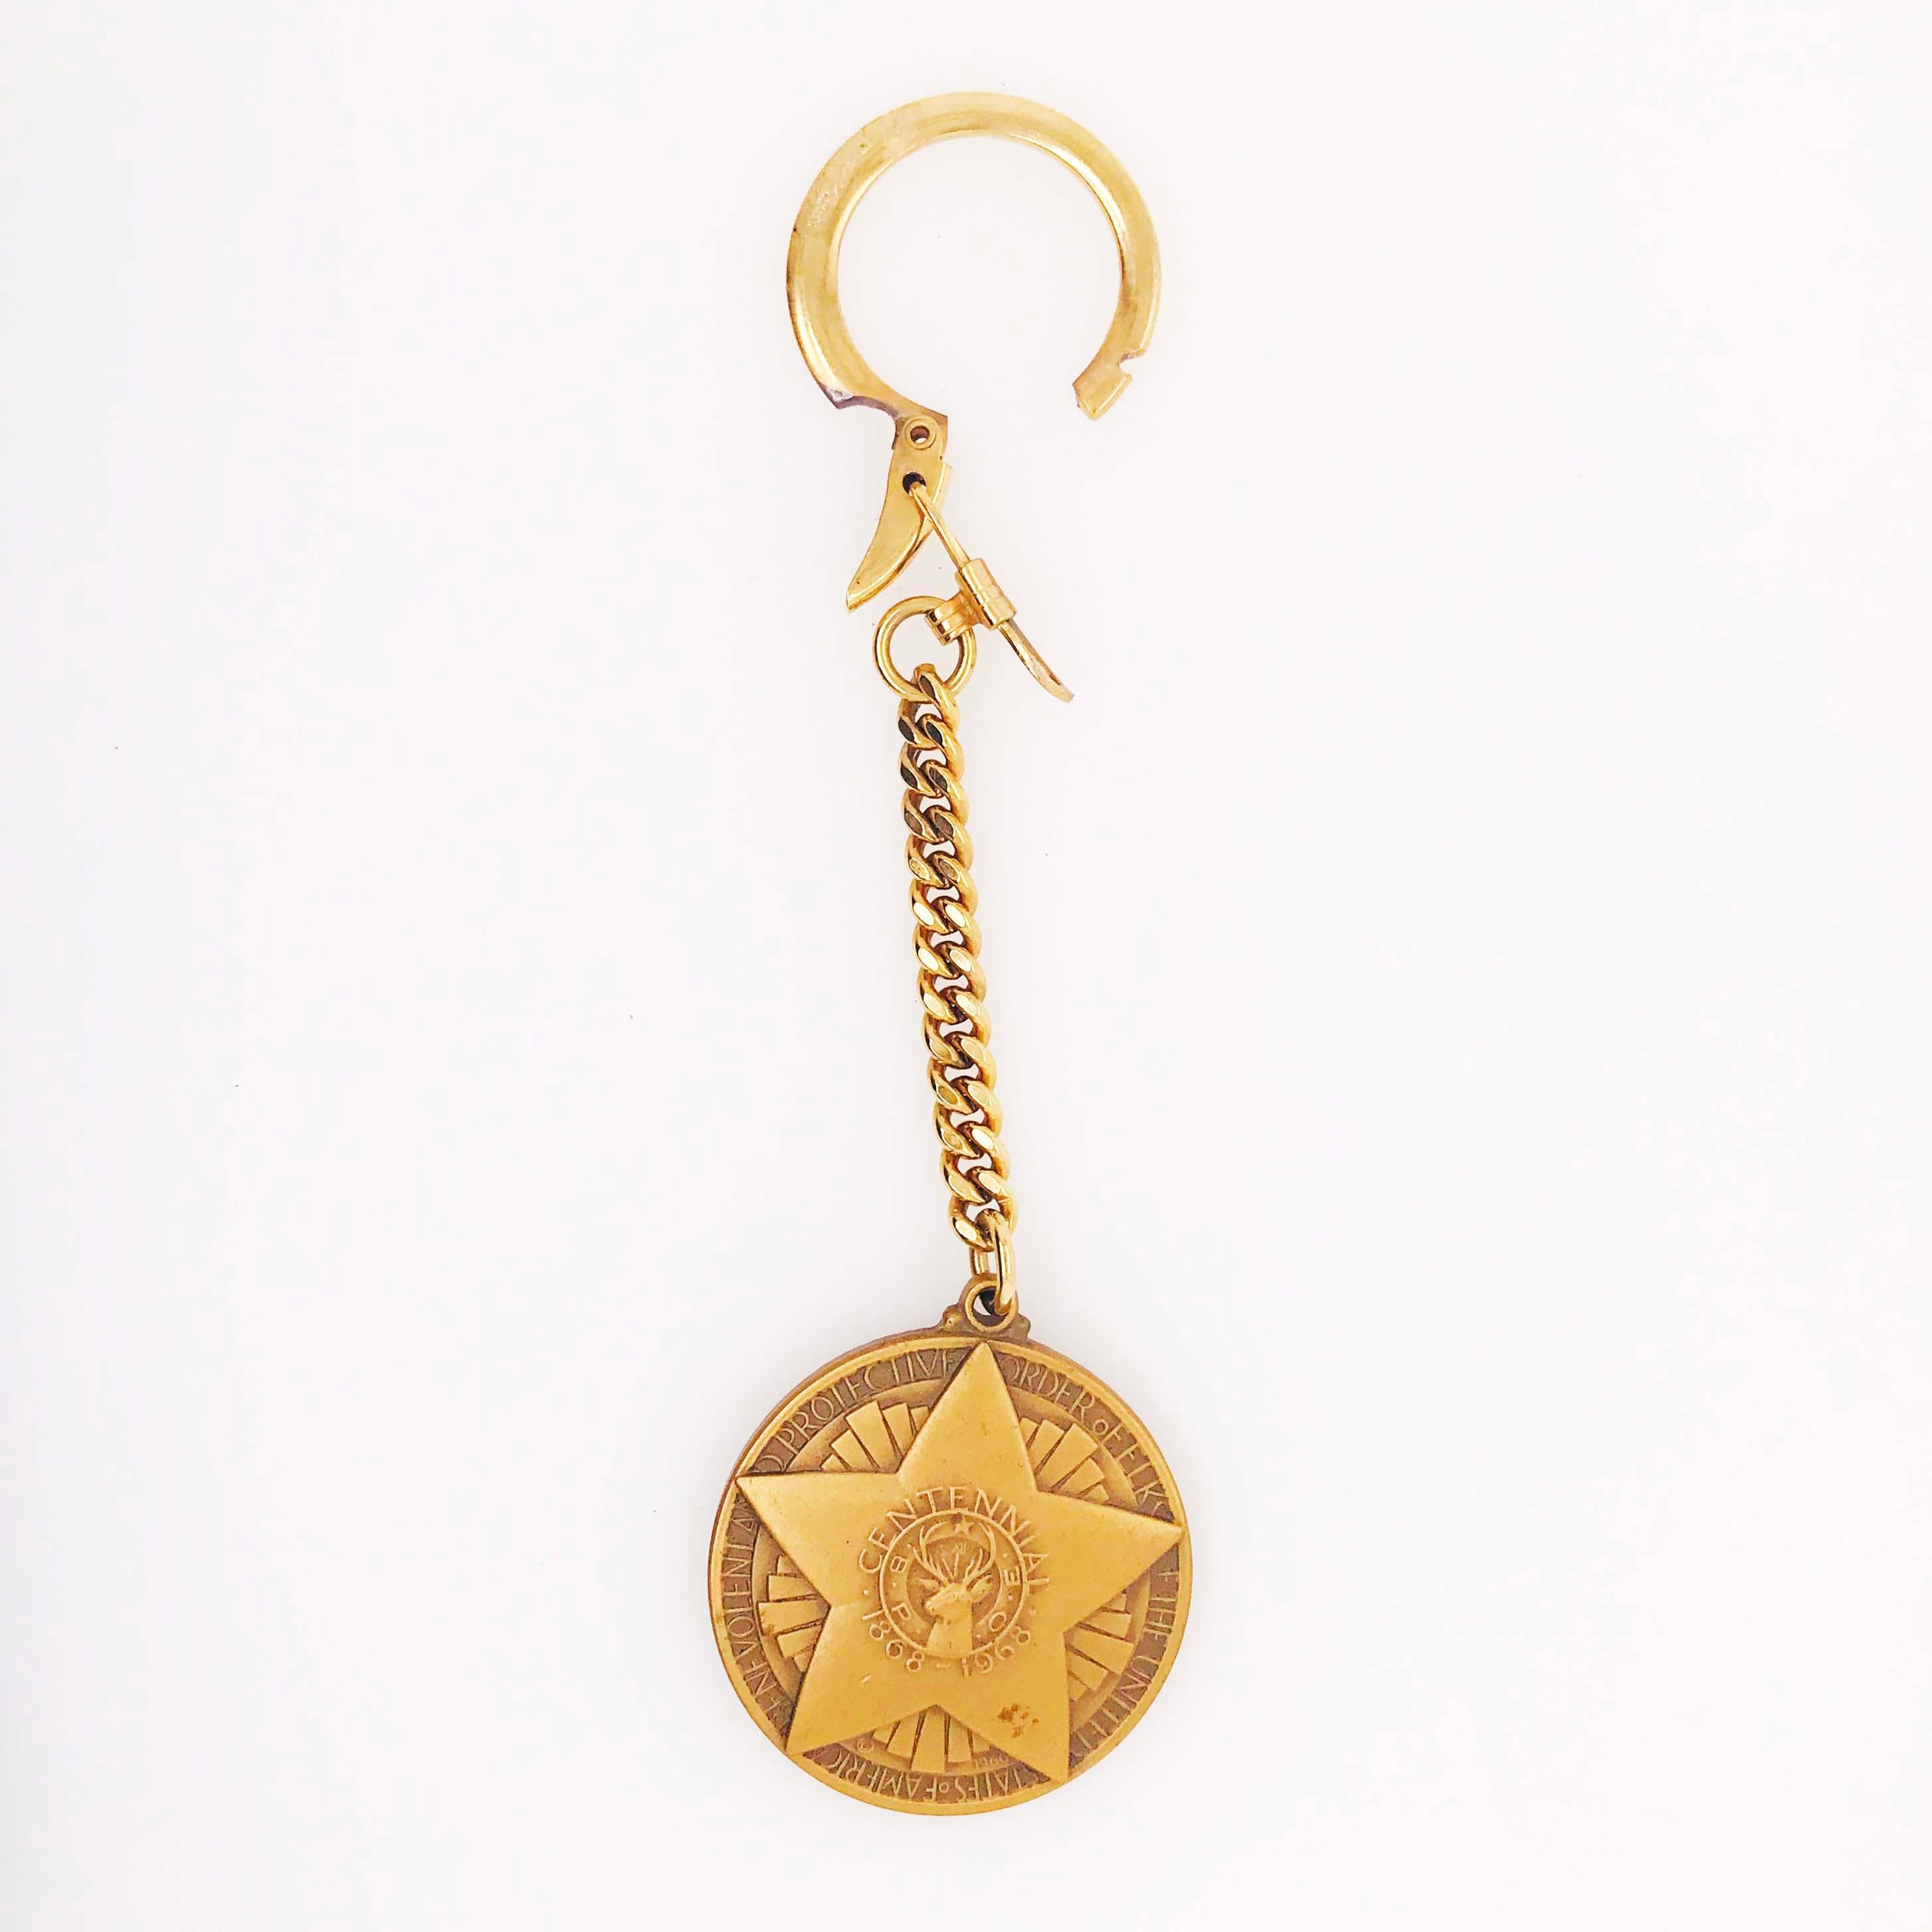 Gold Coin Keychain with Star and Deer accents! This incredible keychain is a unique design with a big star that has a profile of a glorious deer on the front. On the back of the keychain there is are deer antlers framed by a floral/vine seal design.